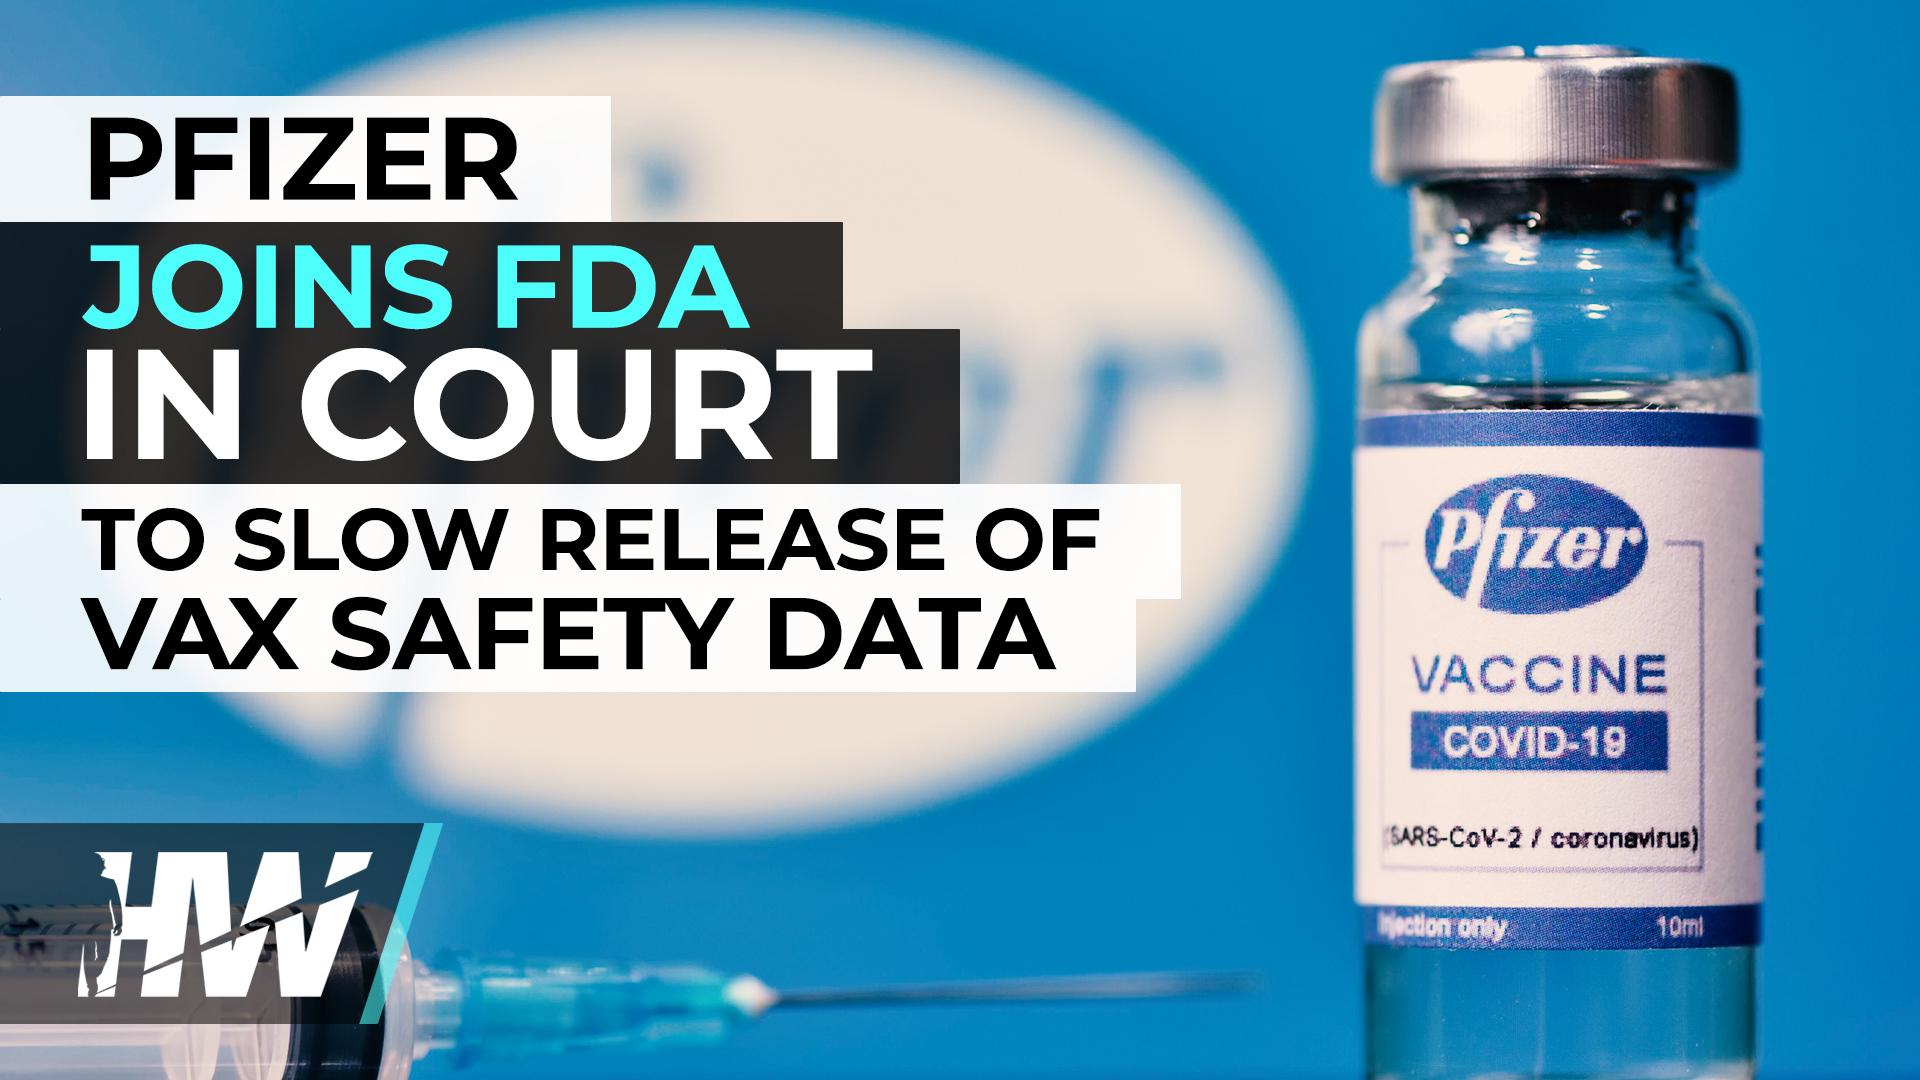 PFIZER JOINS FDA IN COURT TO SLOW RELEASE OF VAX SAFETY DATA